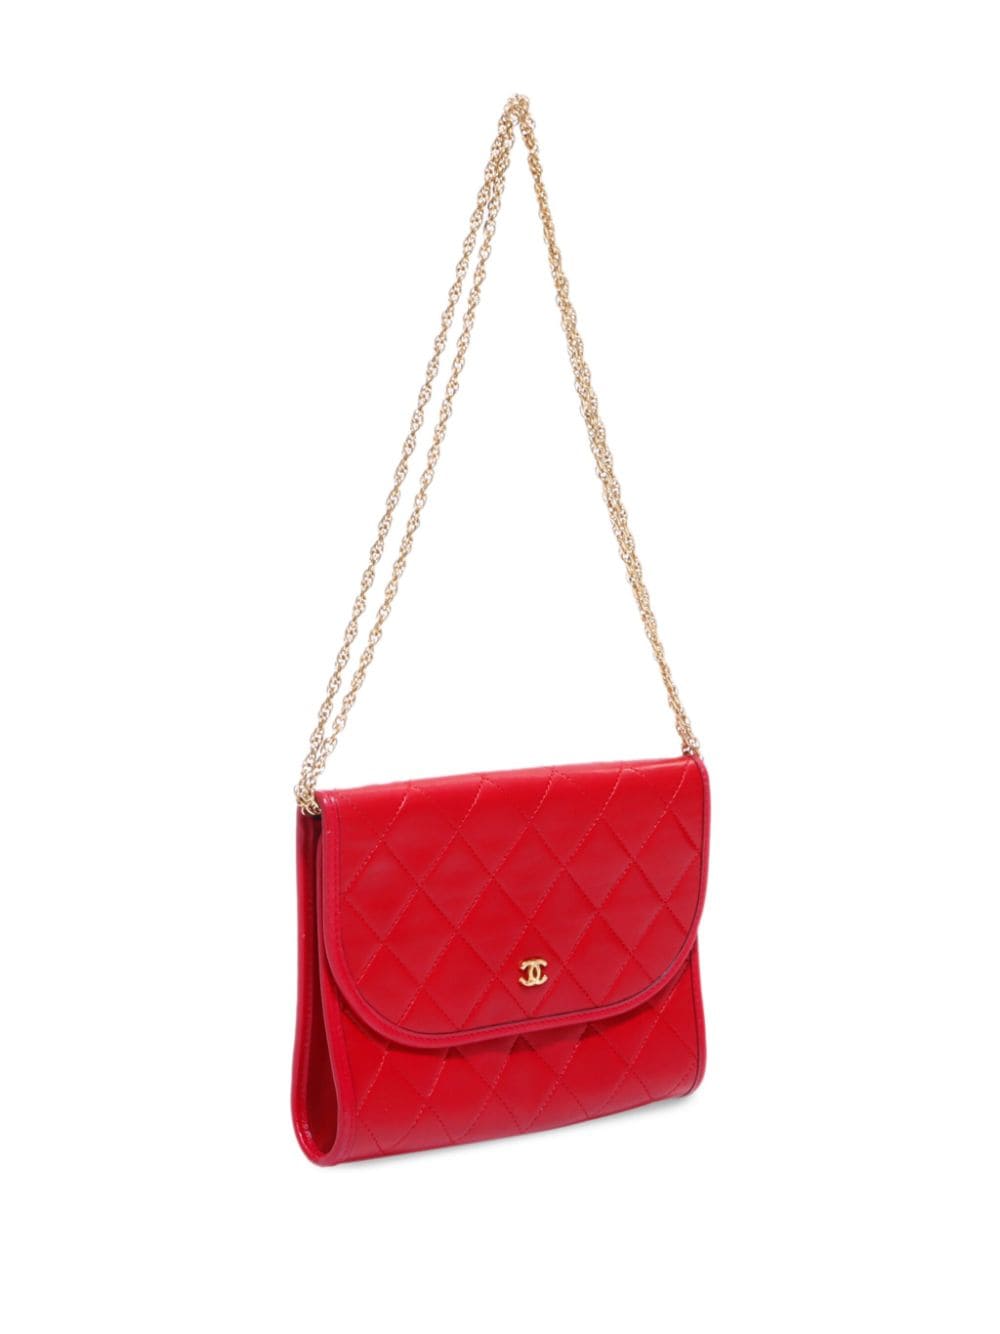 Pre-owned Chanel Cc 菱纹绗缝单肩包（1990年代典藏款） In Red